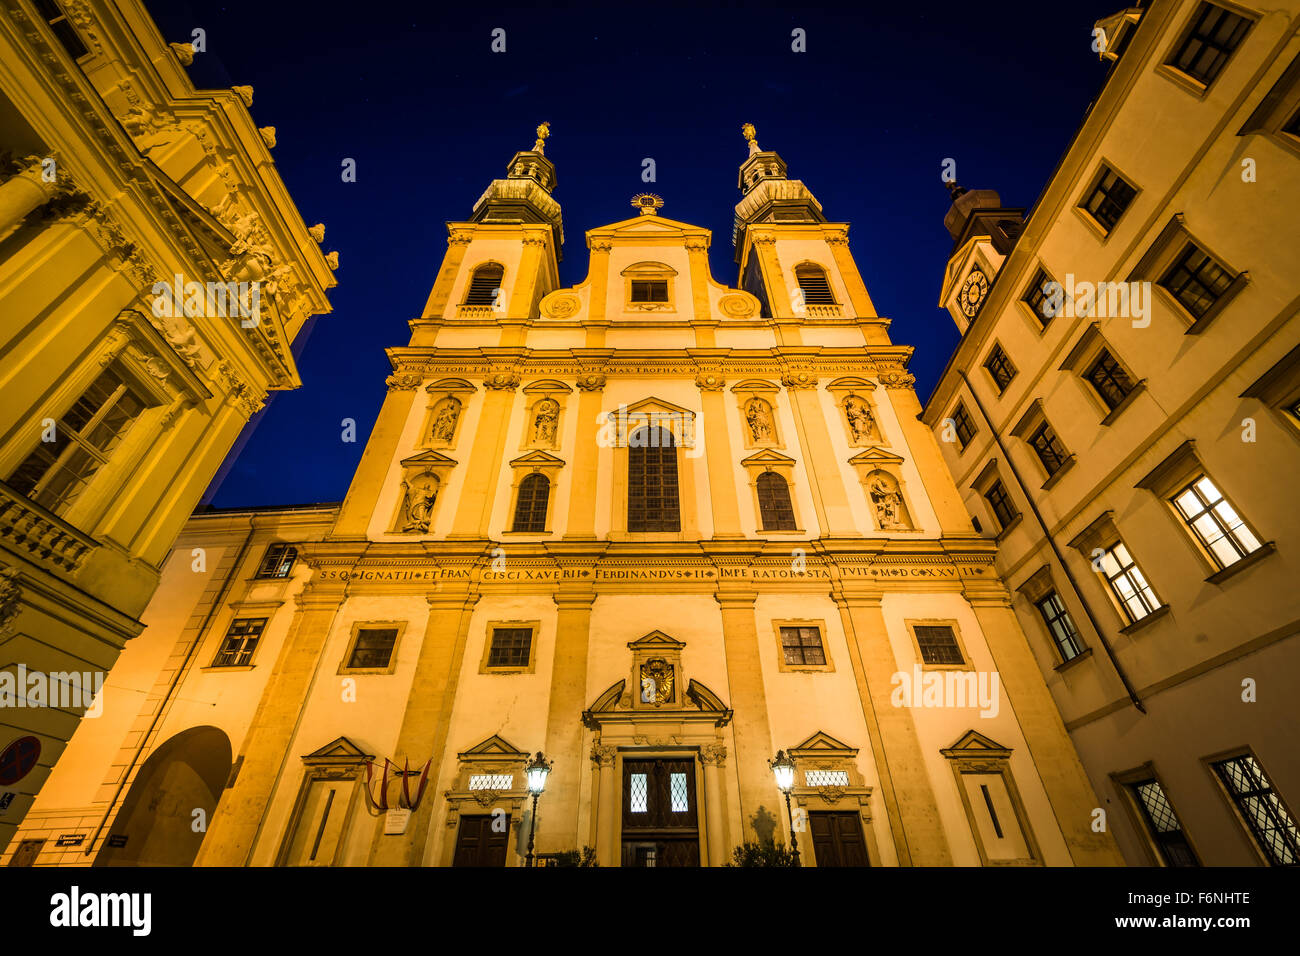 The Jesuit Church at night, in the Inner Stadt, Vienna, Austria. Stock Photo